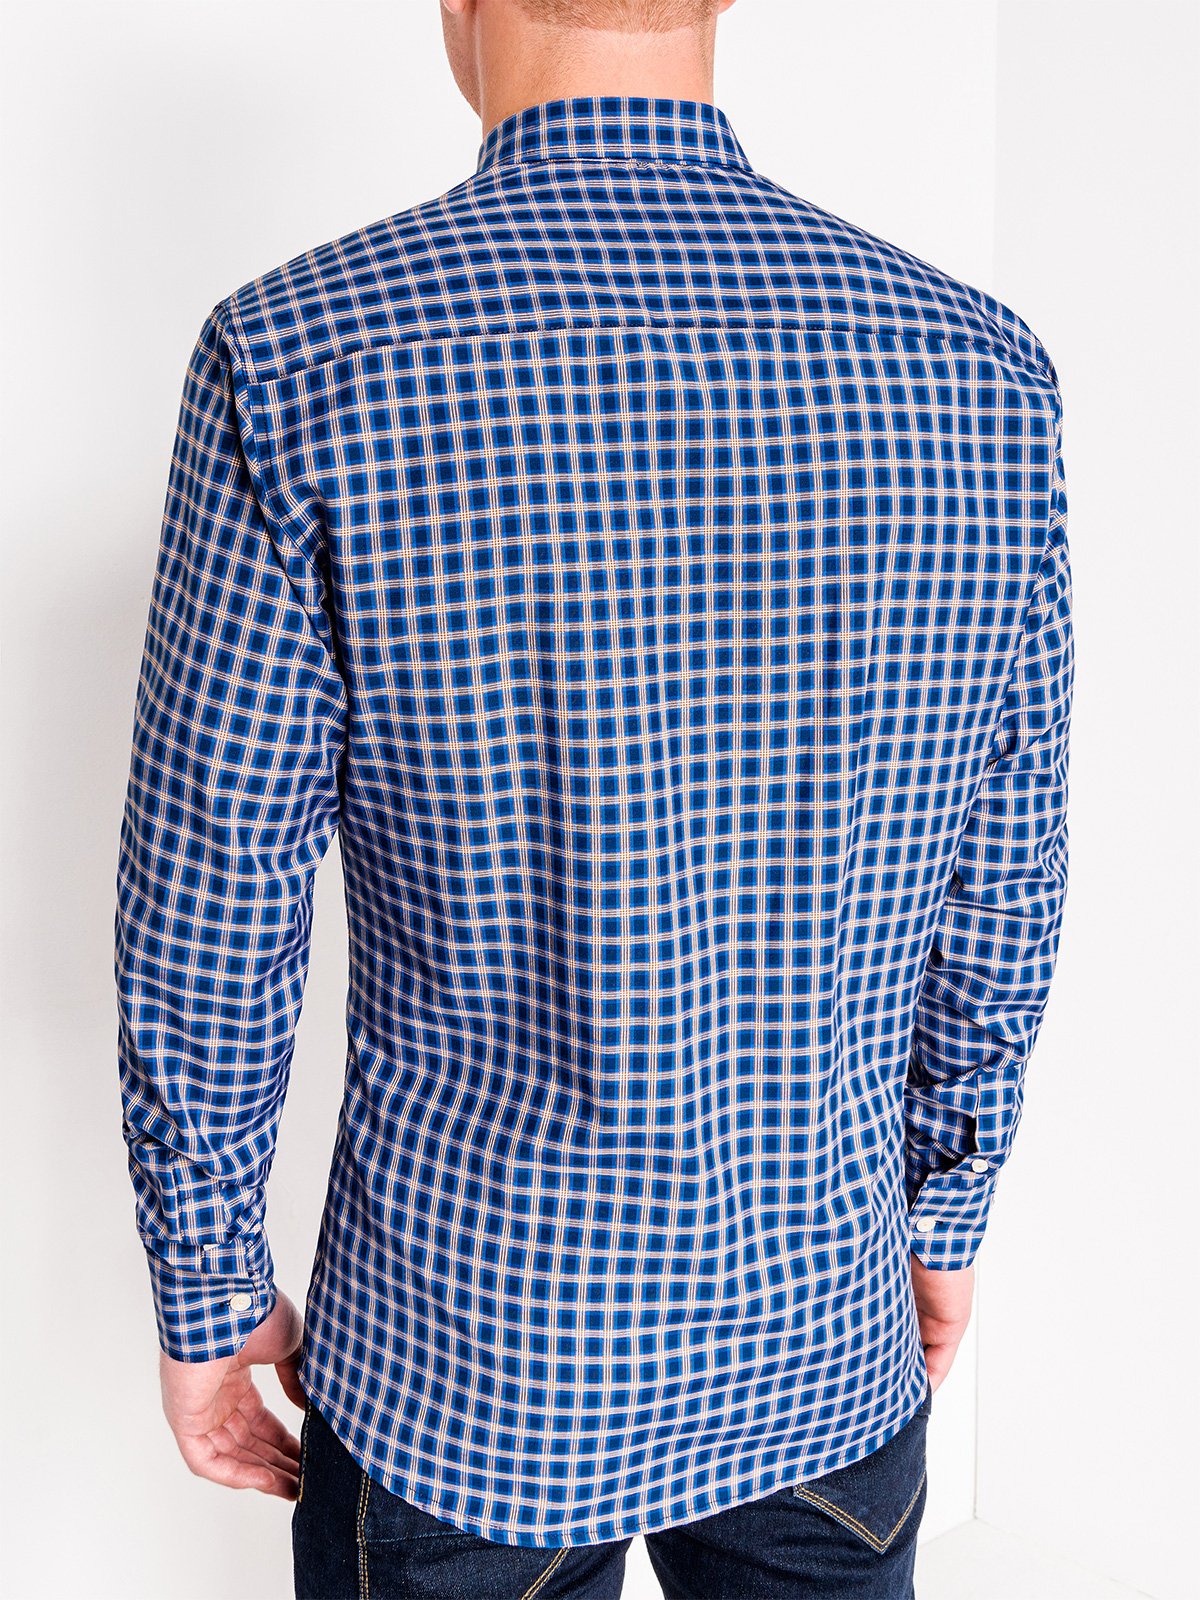 Men's check shirt with long sleeves K438 - navy/yellow | MODONE ...